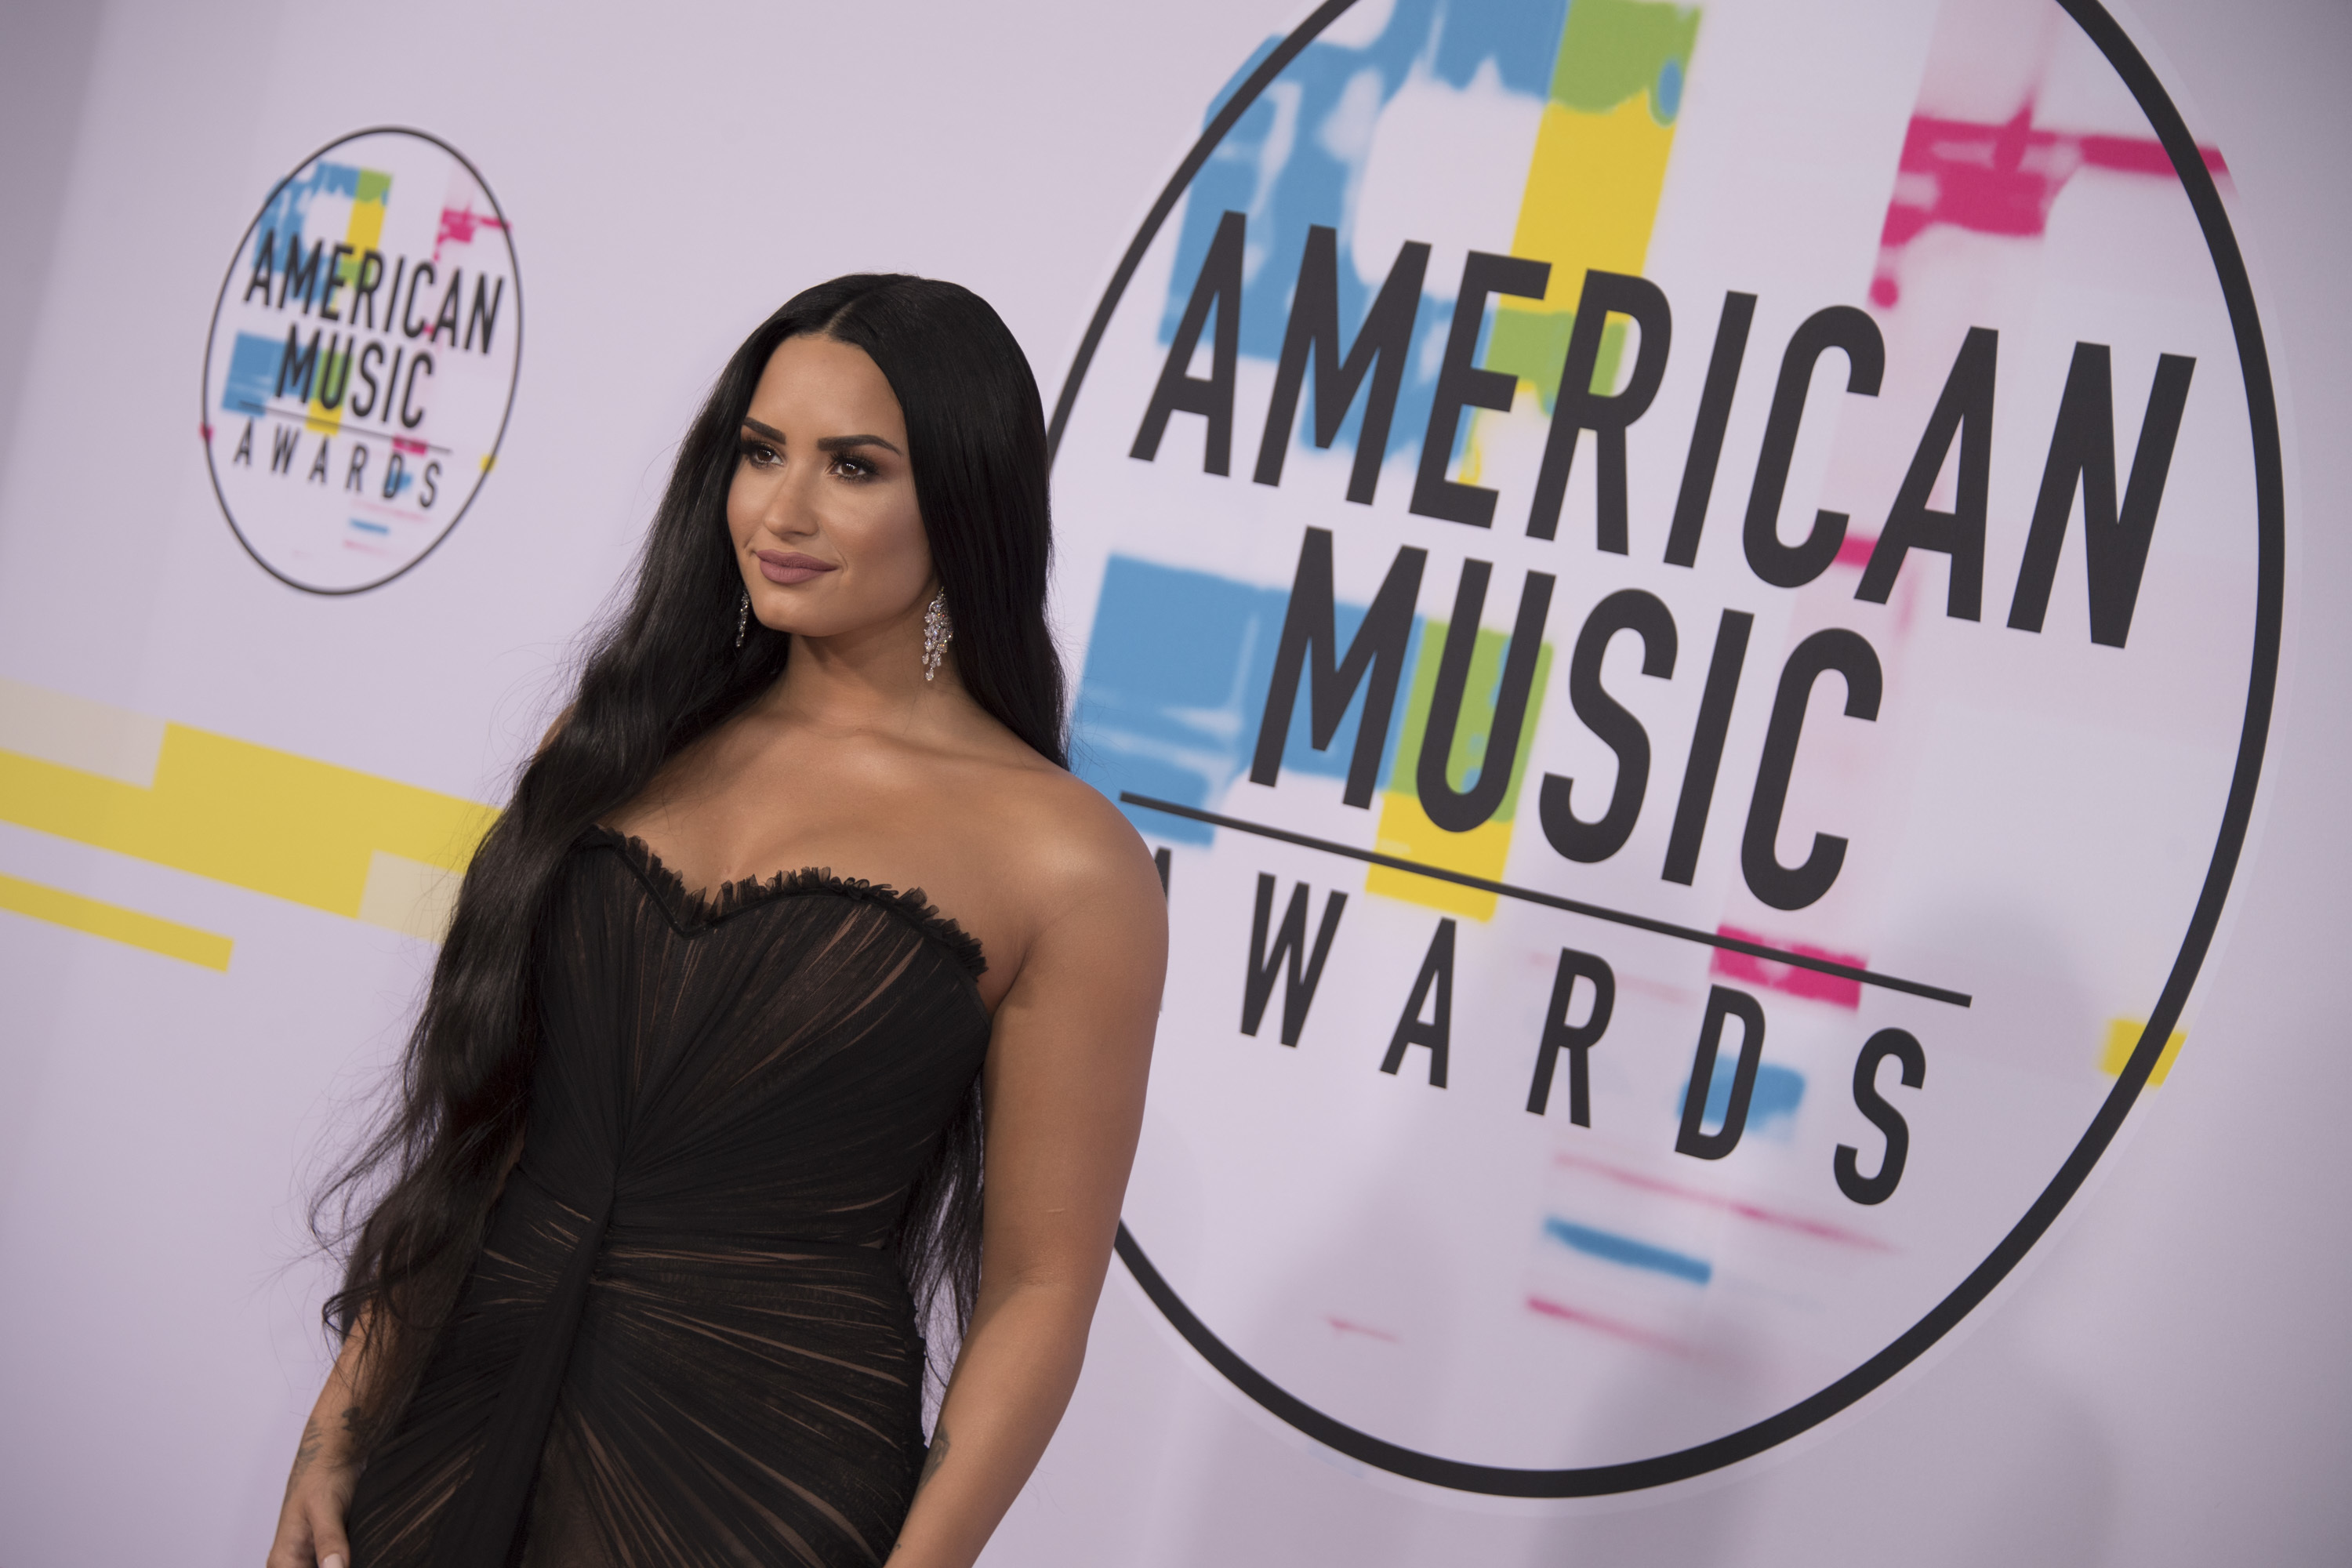 AMAs reflect year in pop music, where male acts dominated